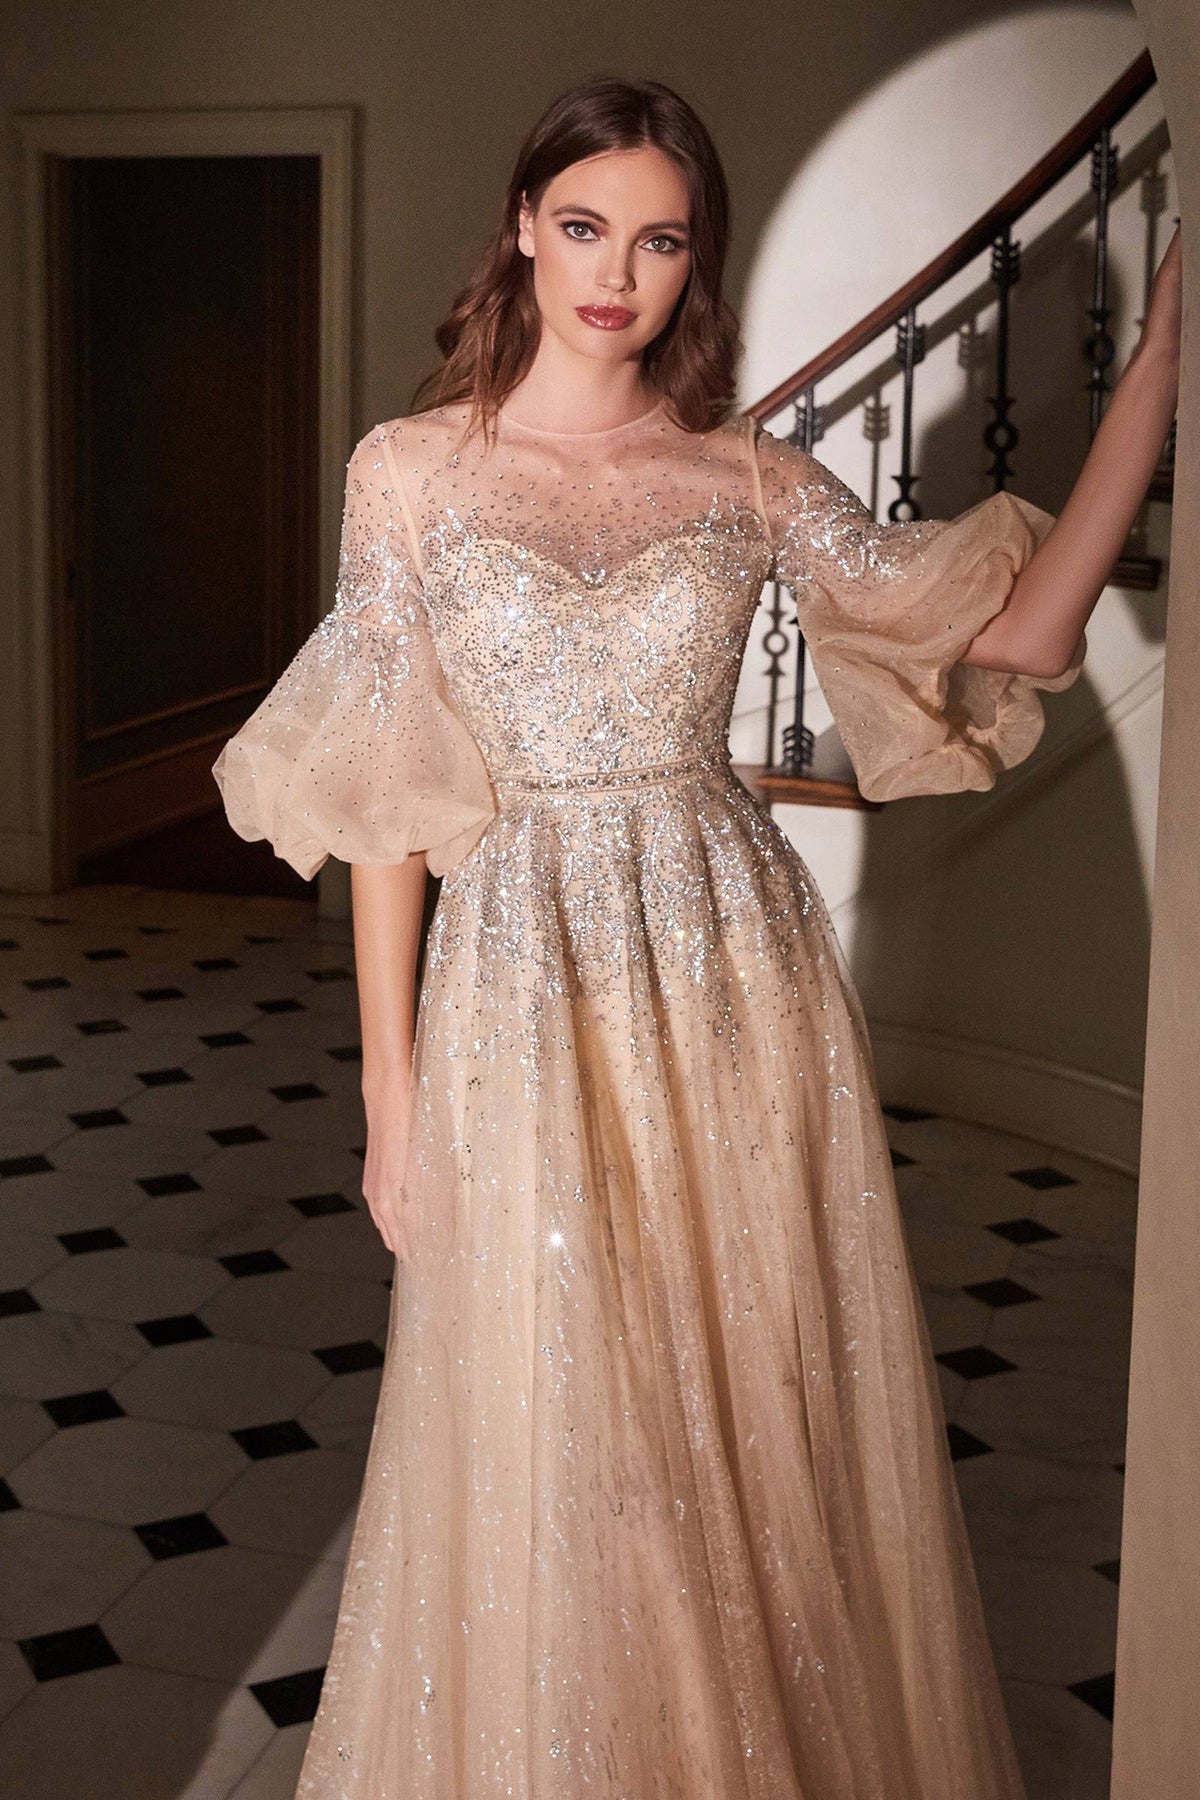 Sparkly Sheer Gown with Long Sleeves and Ombre Glitter Waistline #CDB703 - NORMA REED